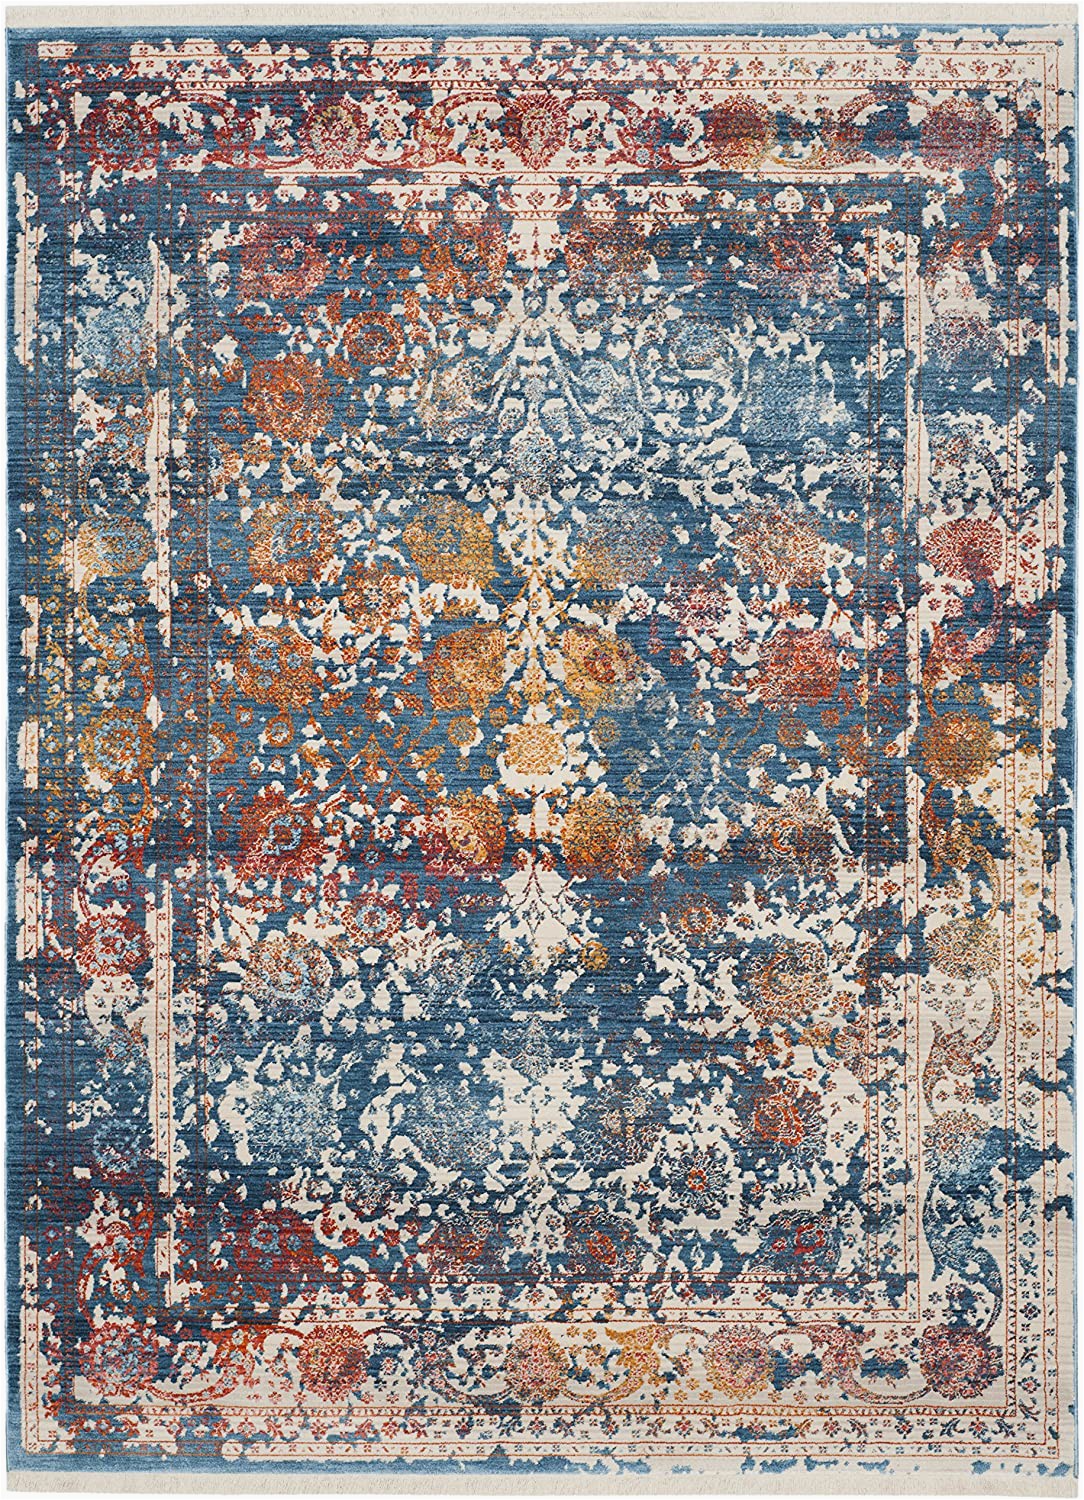 6 by 6 area Rug Safavieh Vintage Persian Collection Vtp409k area Rug 6 X 9 Turquoise Multi